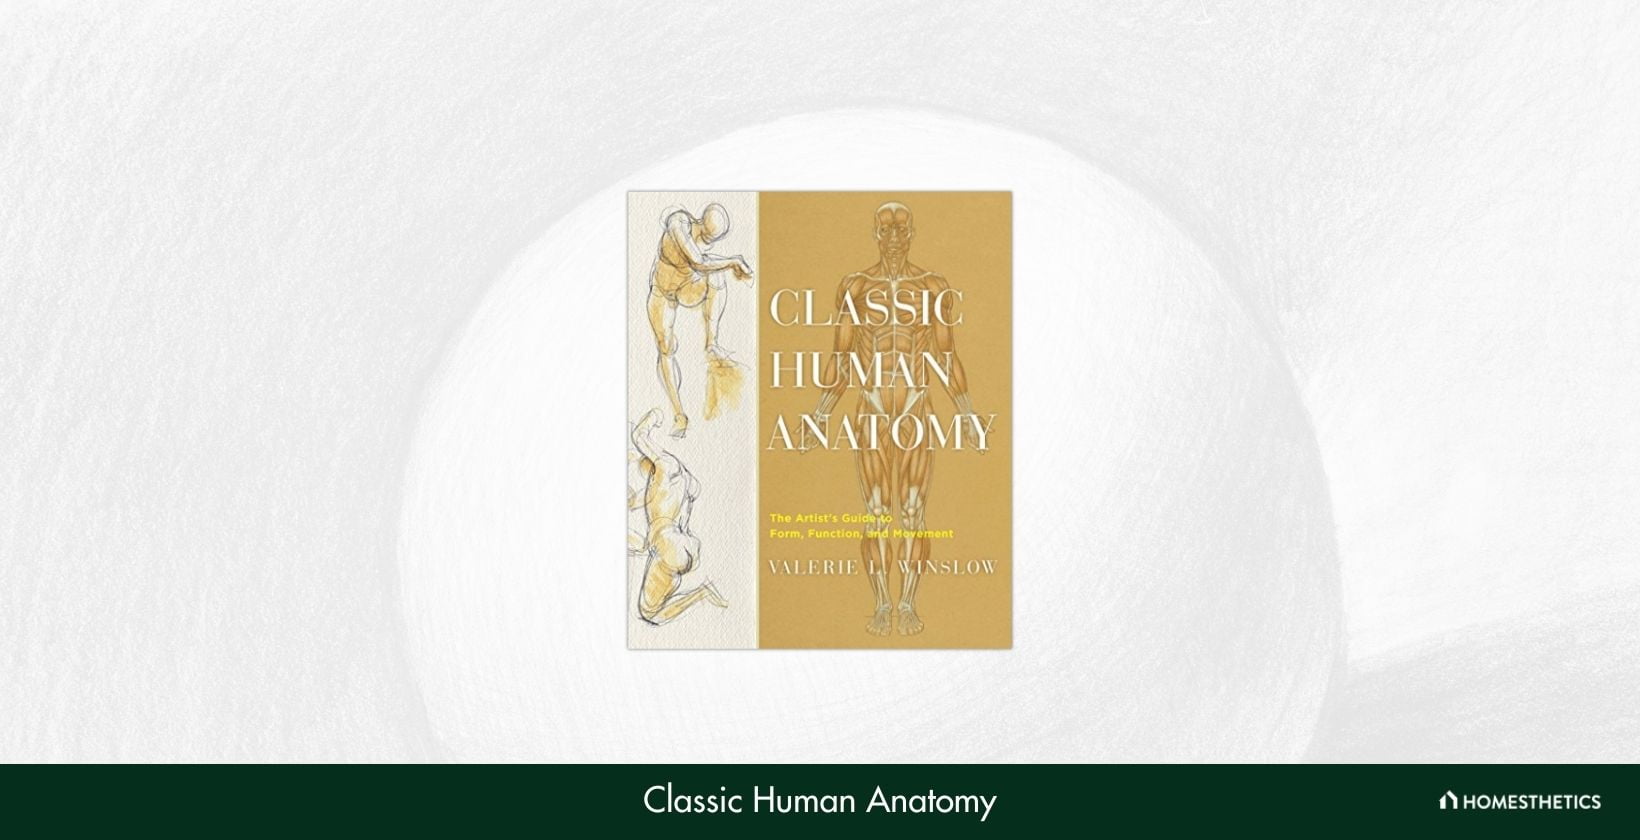 Classic Human Anatomy The Artists Guide to Form Function and Movement by Valerie L. Winslow